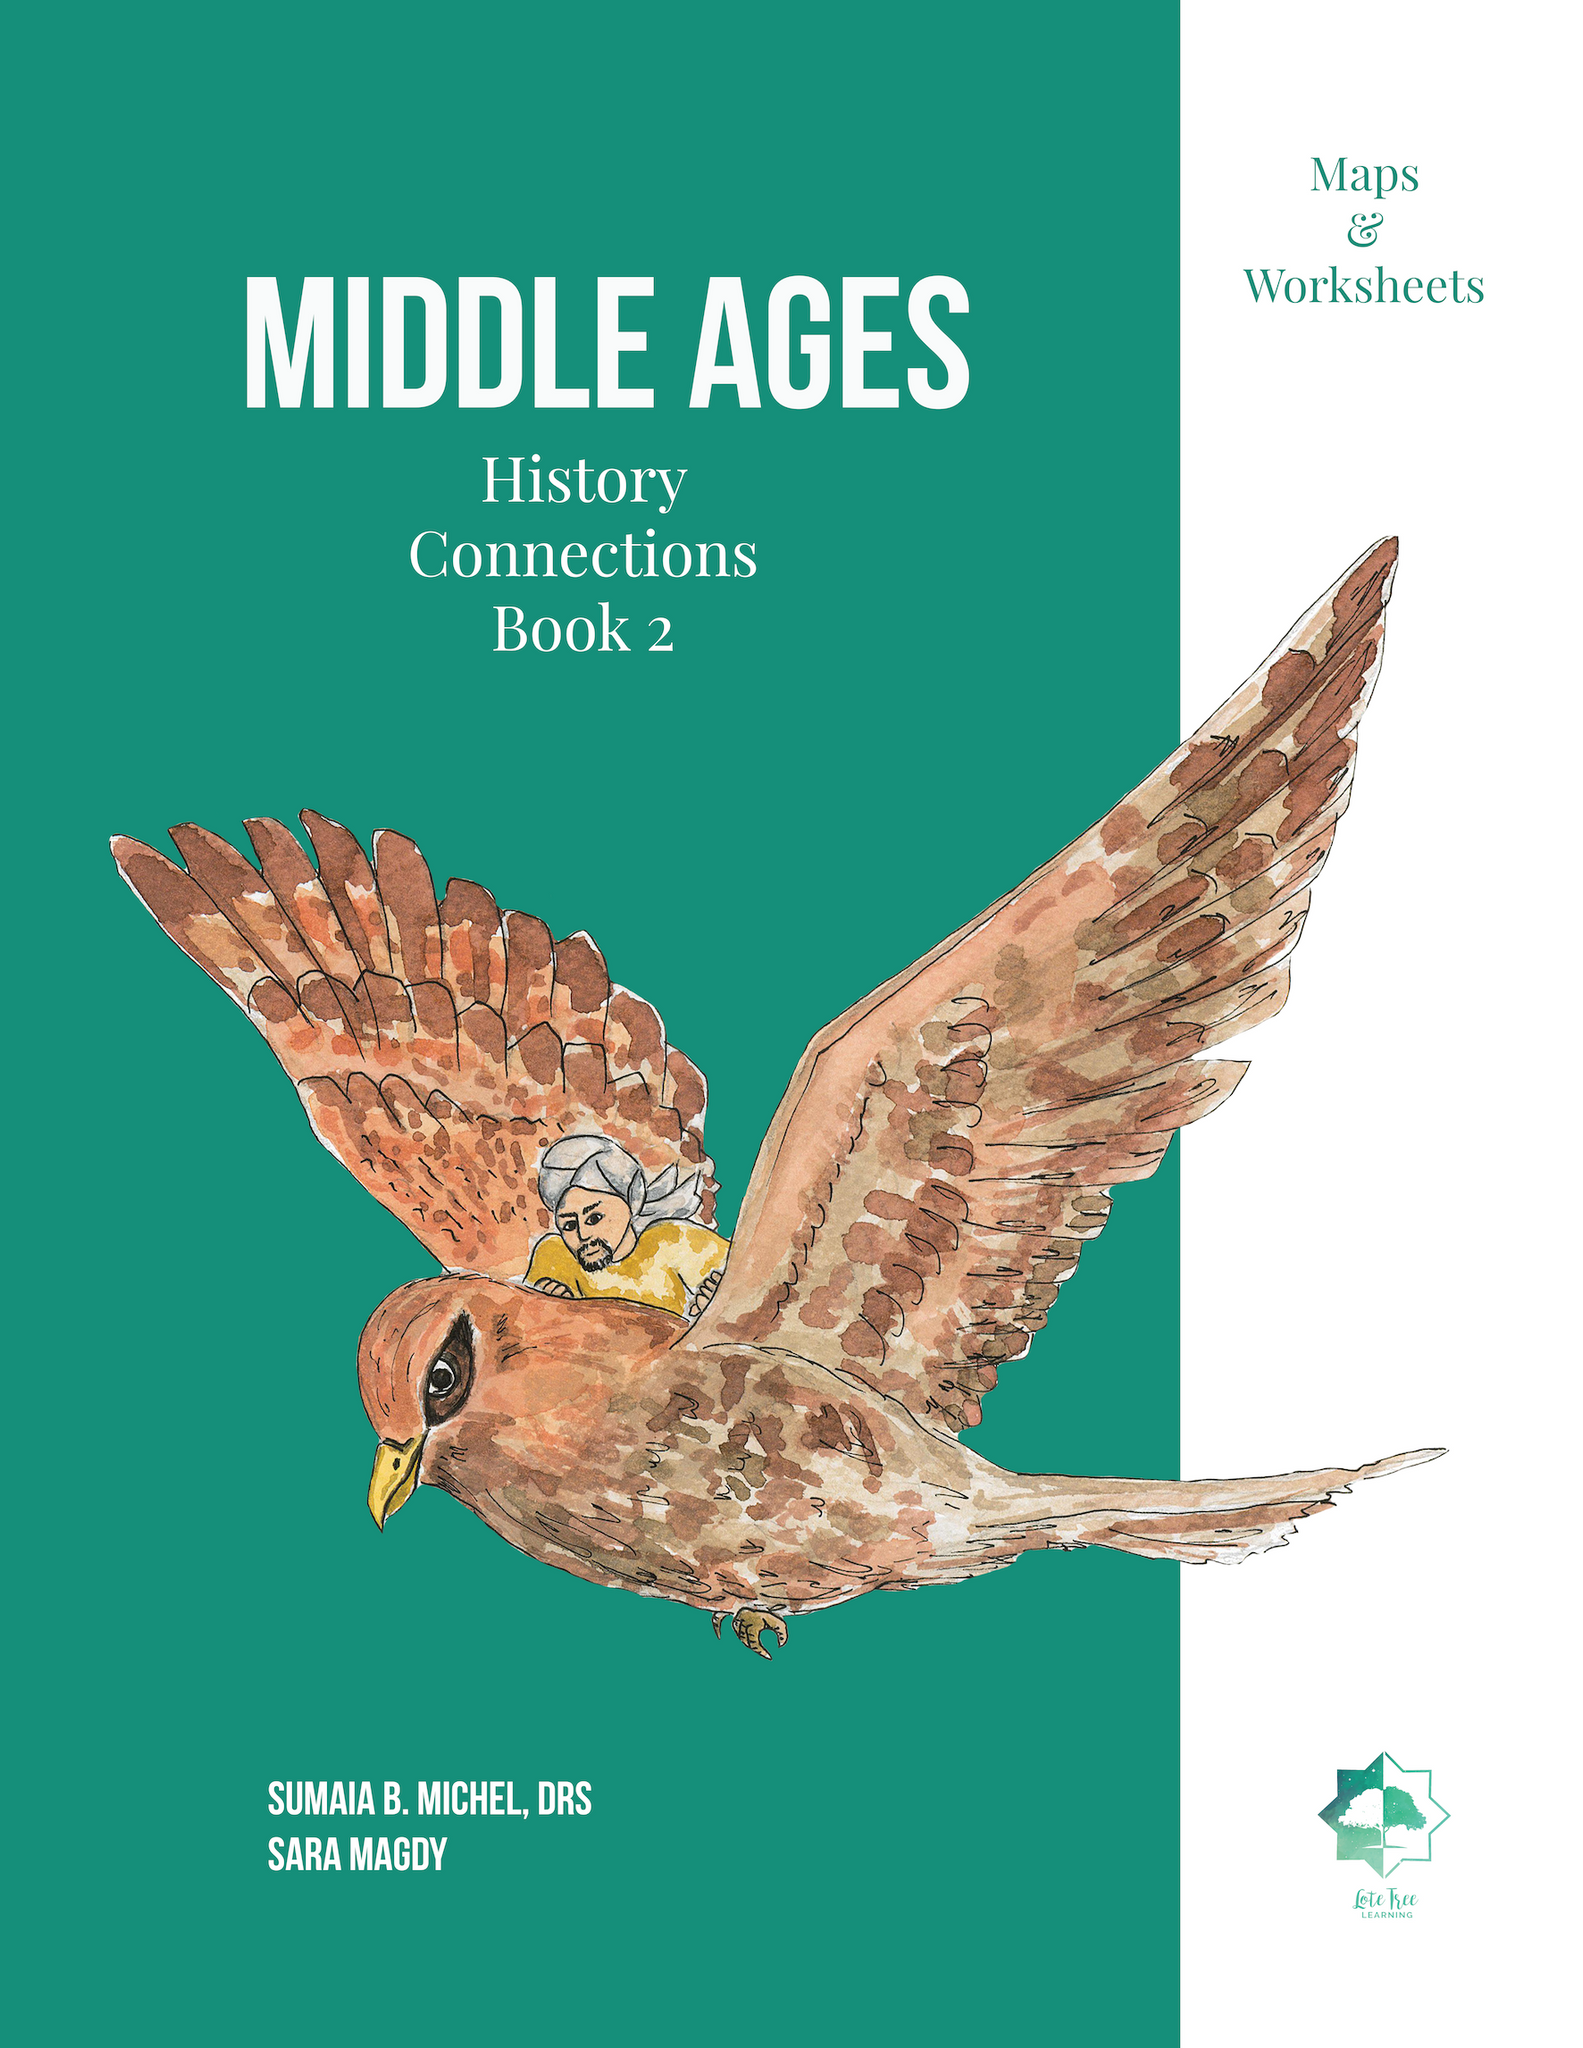 History Connections Primary Grades- Book 2 Middle Ages- Maps & Worksheets